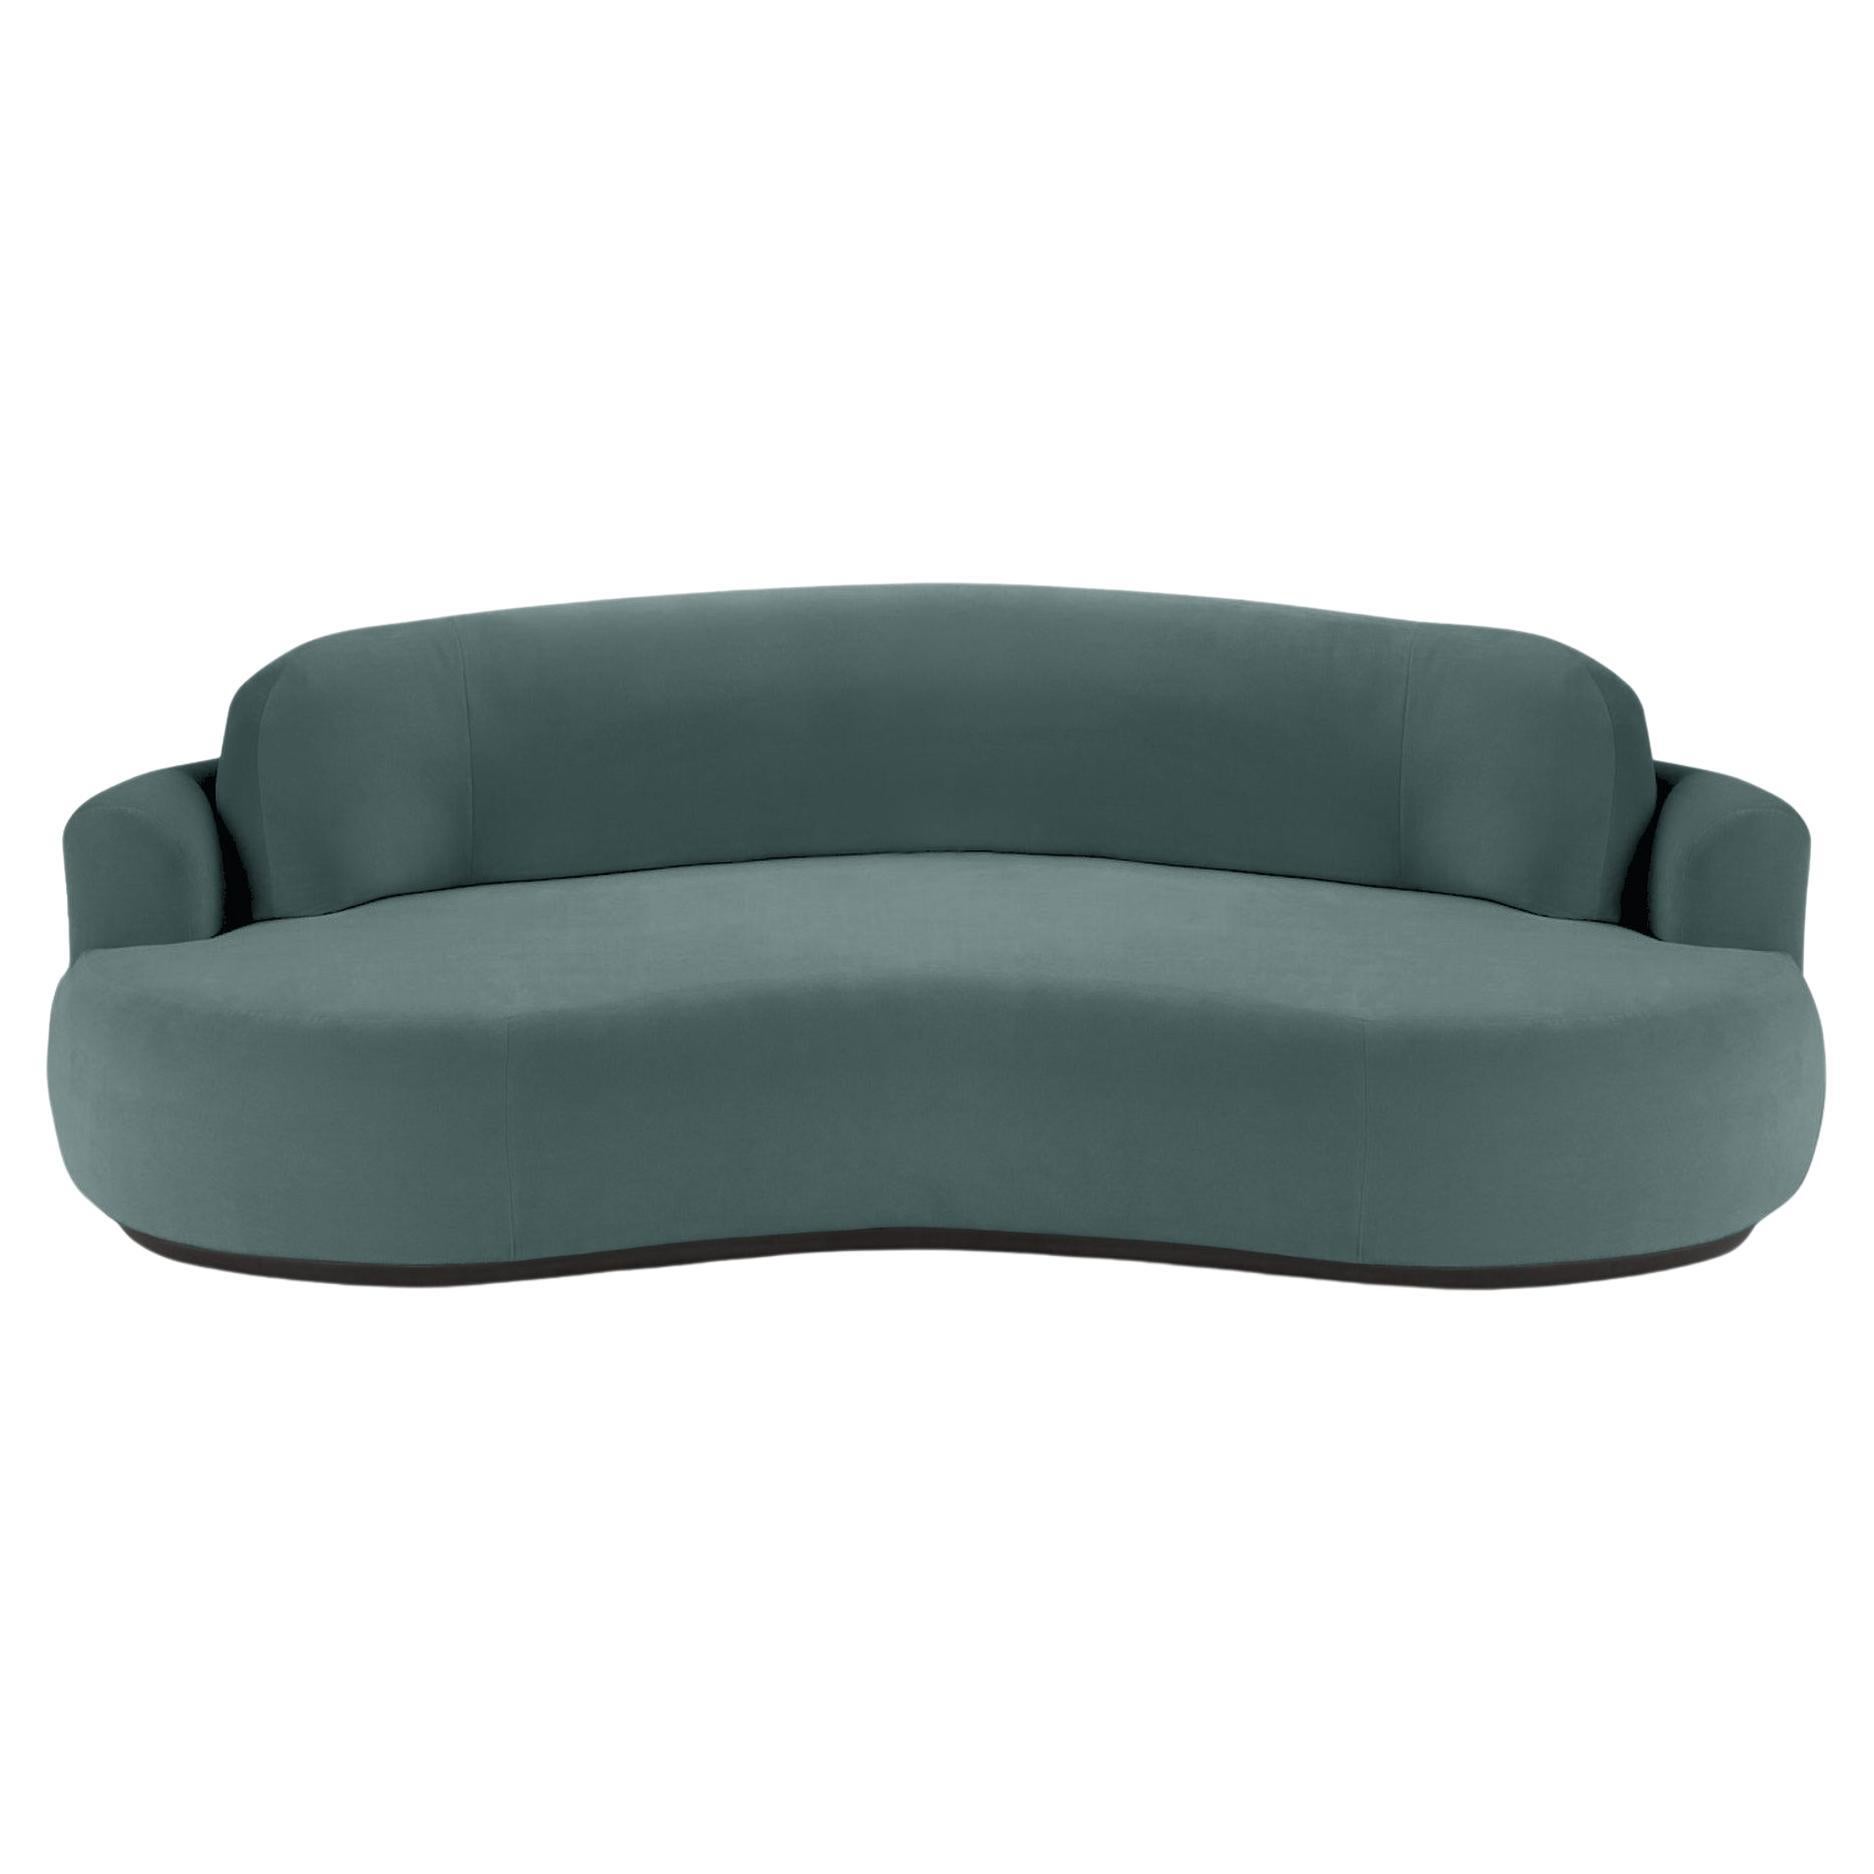 Naked Round Sofa, Small with Beech Ash-056-5 and Teal For Sale